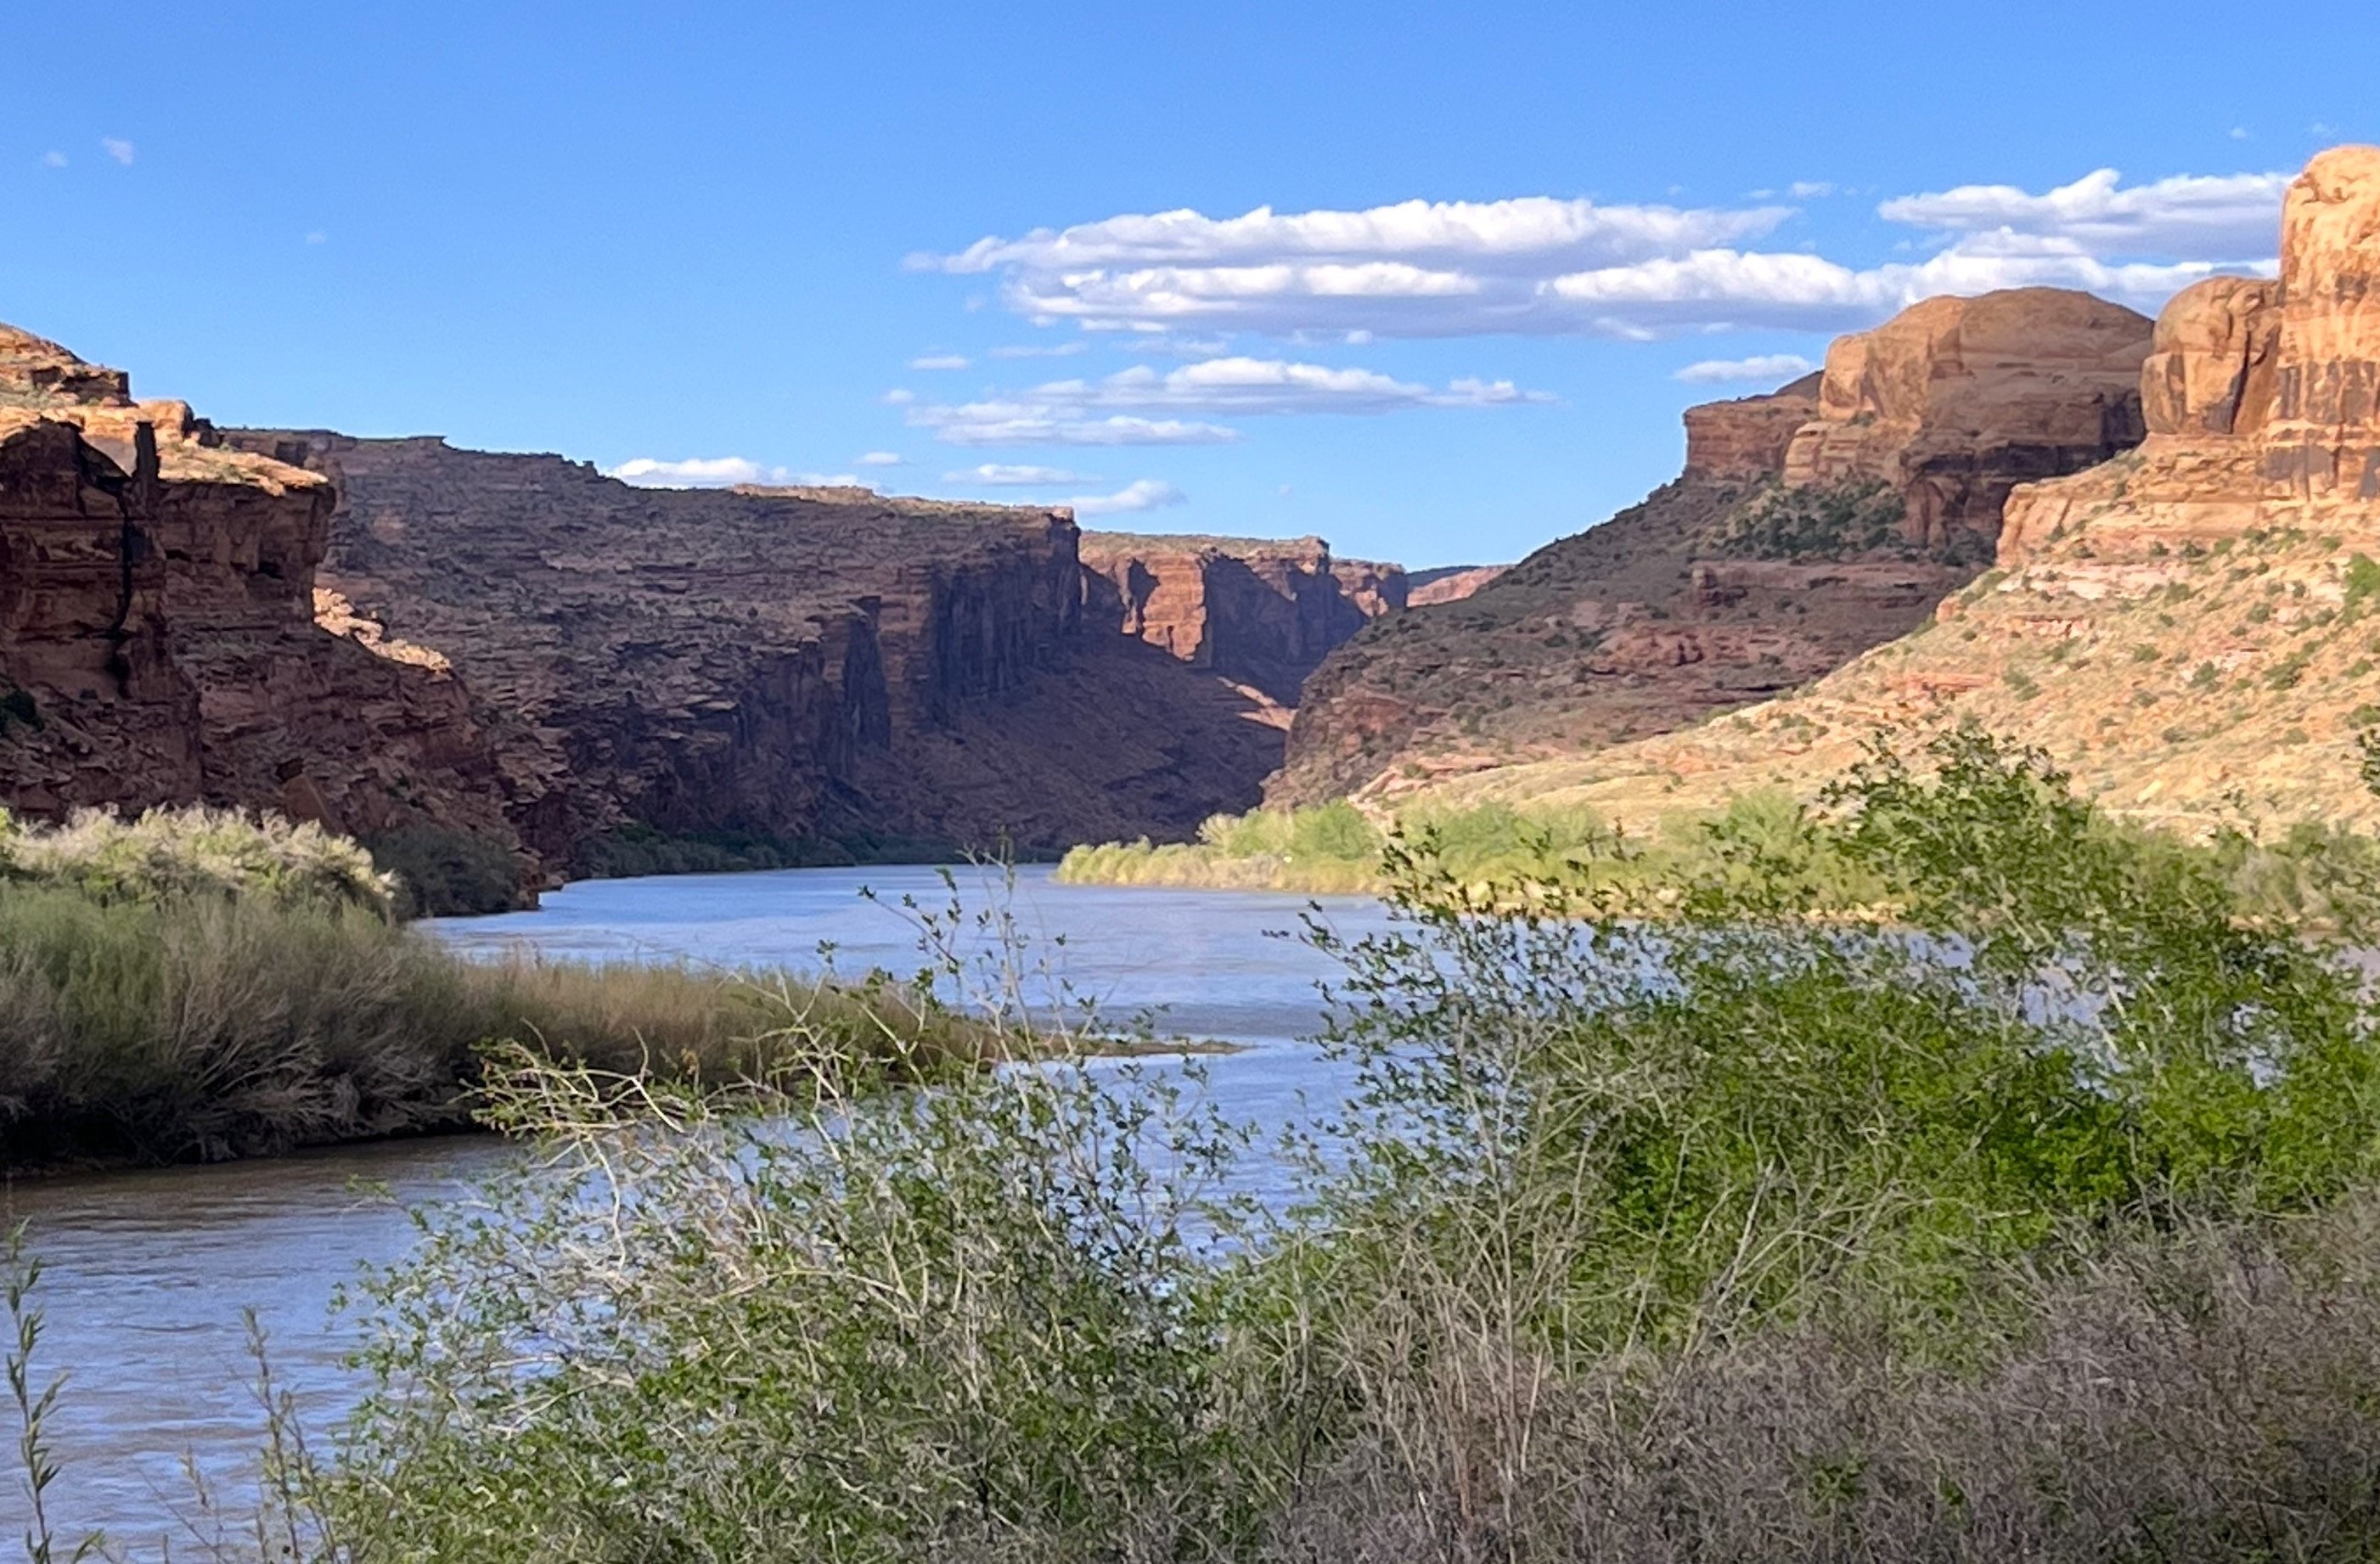 A view of the winding colorado river